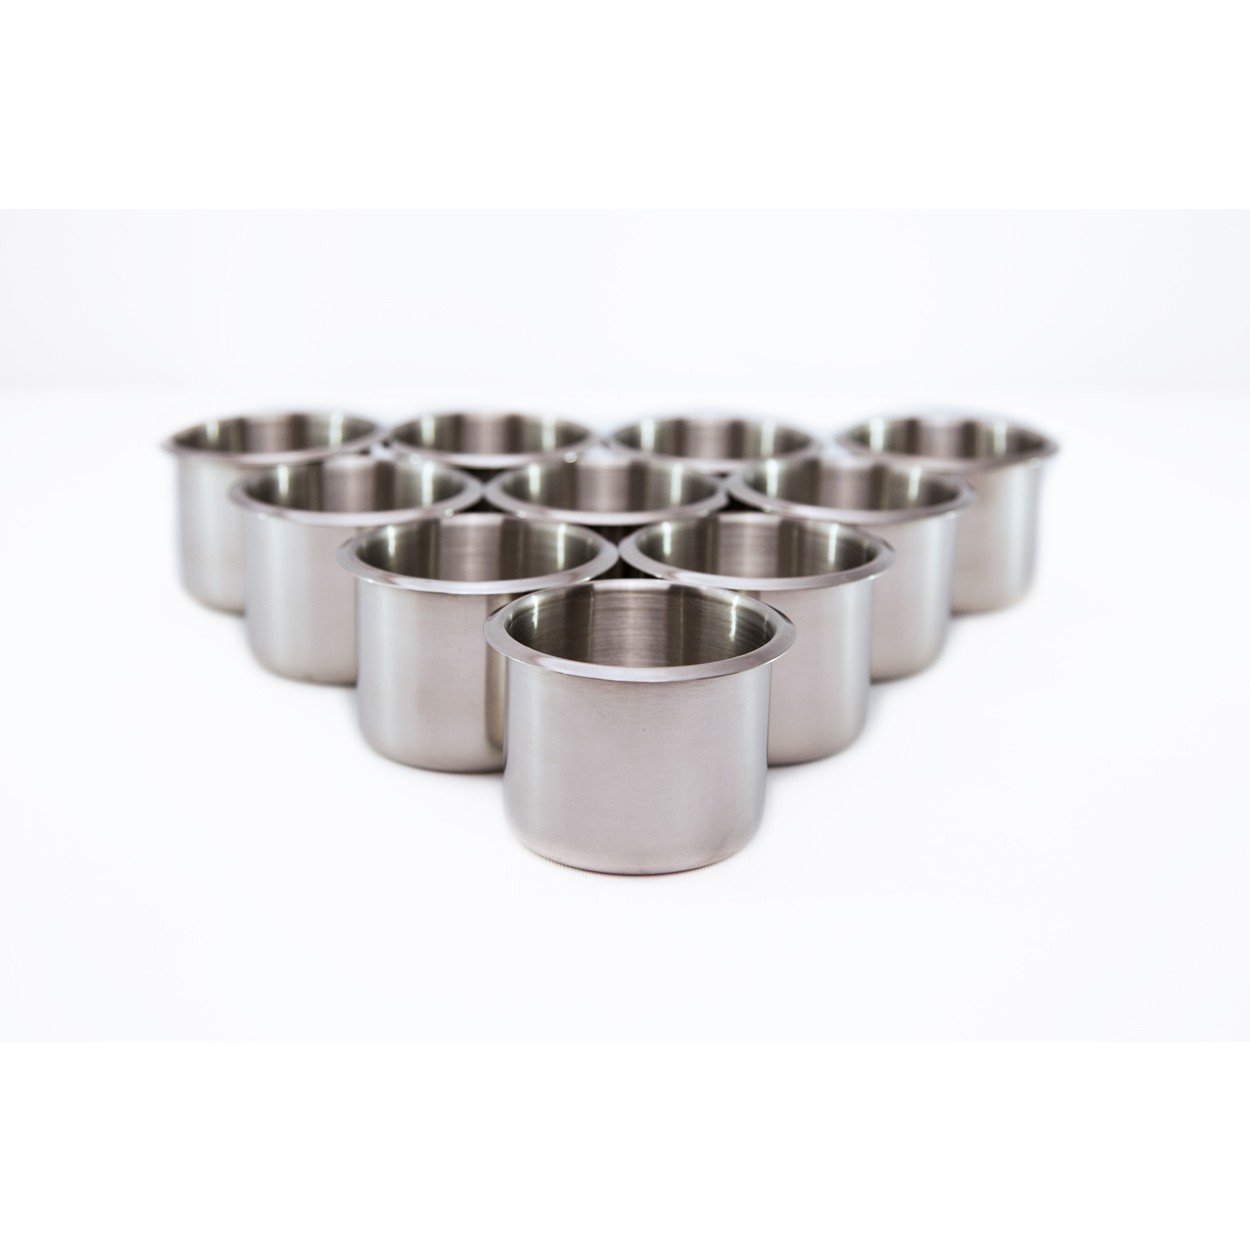 BBO Poker Tables 4 Inch Large Cup Holders for Poker Table